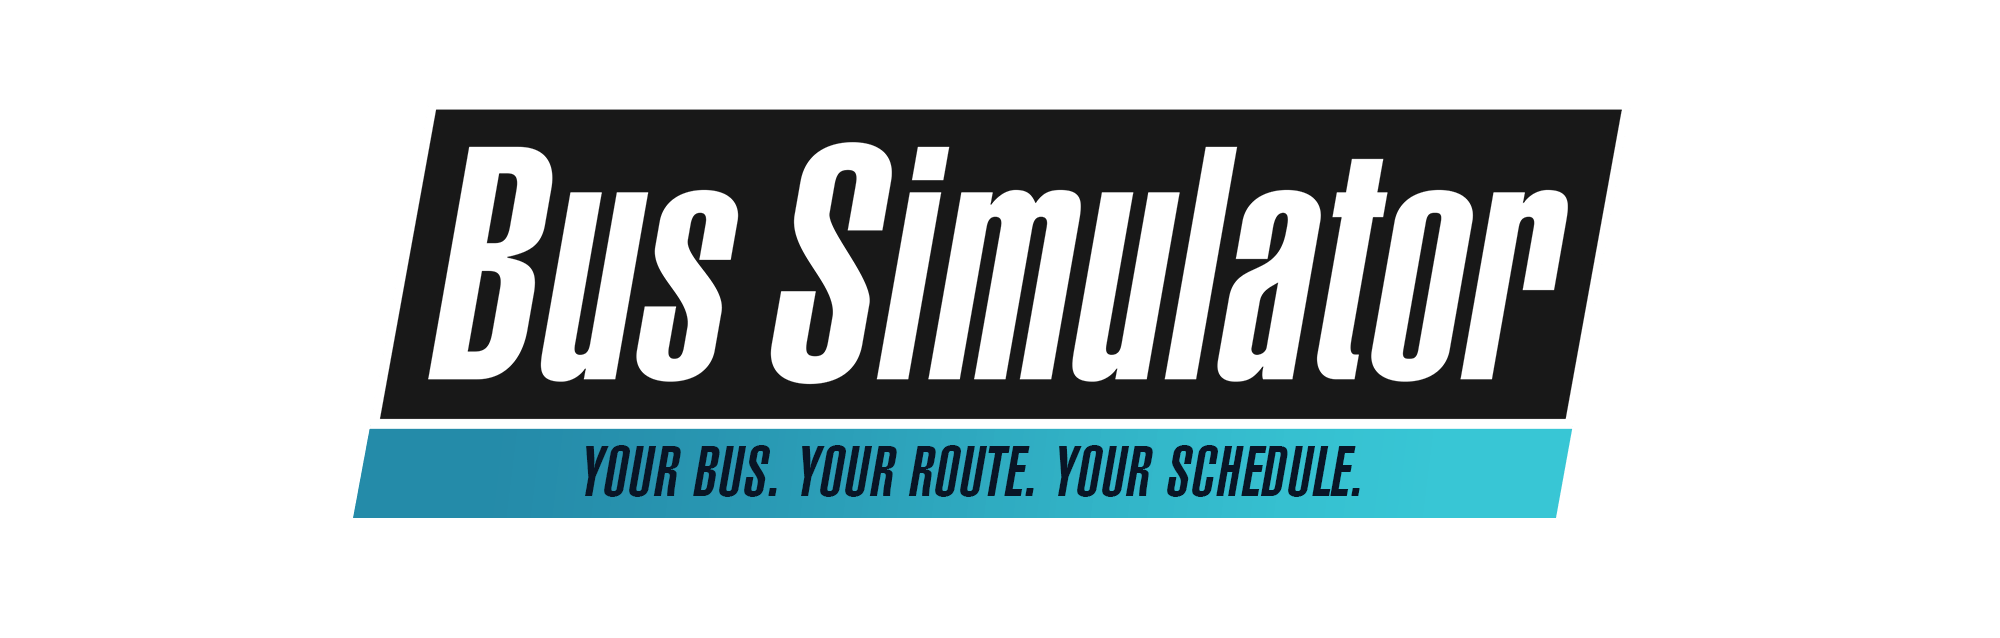 Simulator Logo - Bus Simulator | Your Bus. Your Route. Your Schedule.